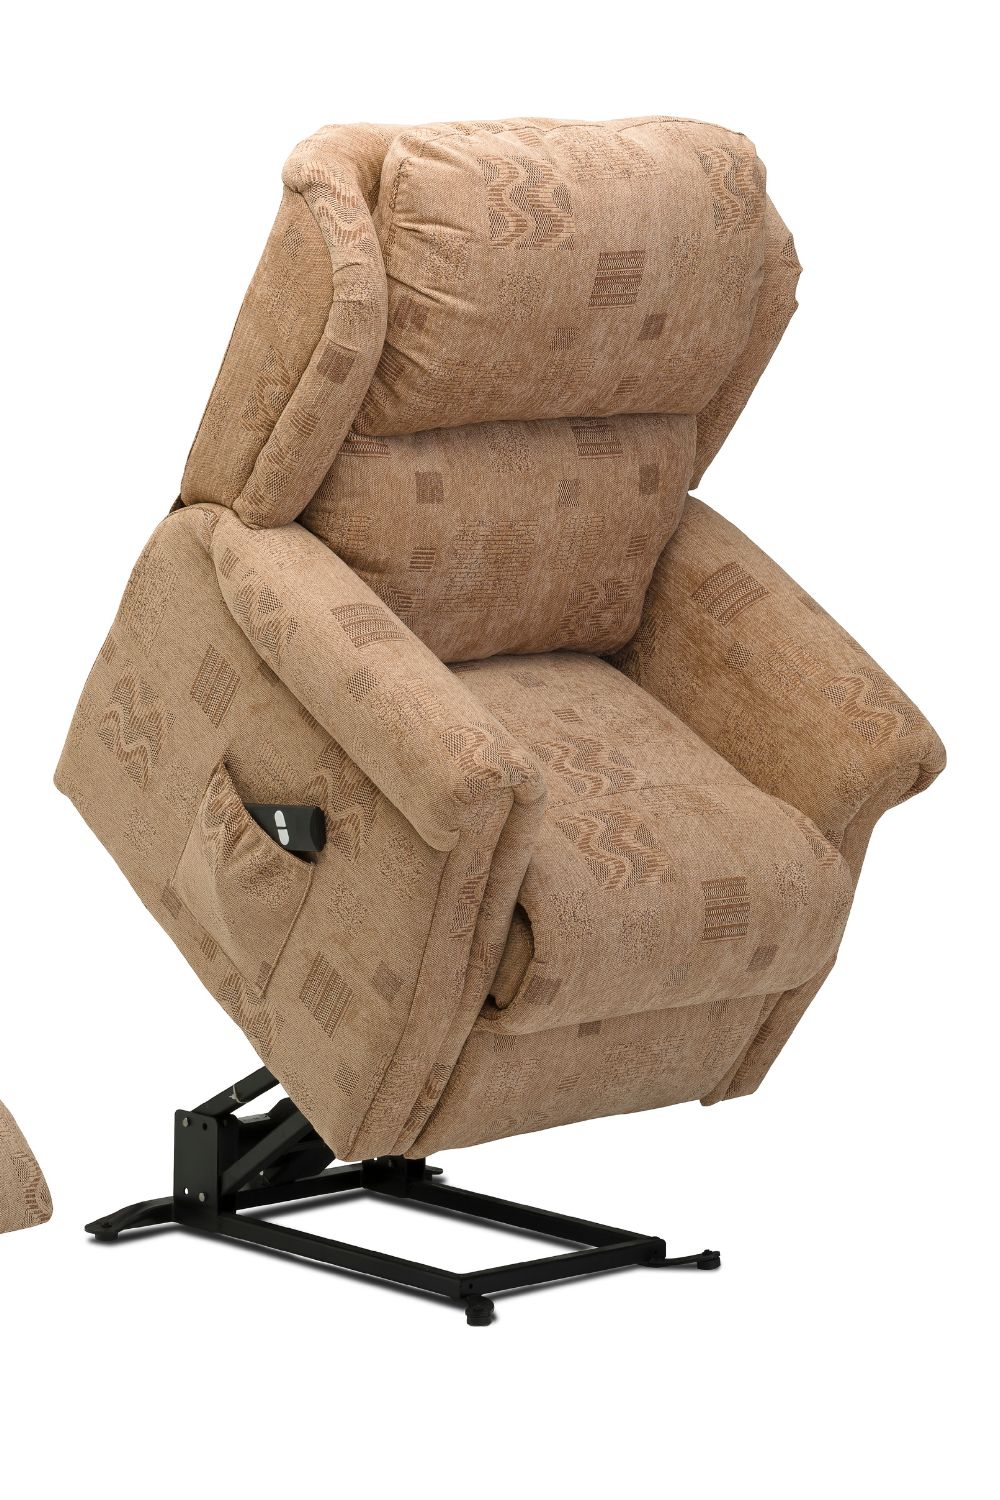 Best Recliners for Seniors: Comfortable and Supportive Options for Relaxation